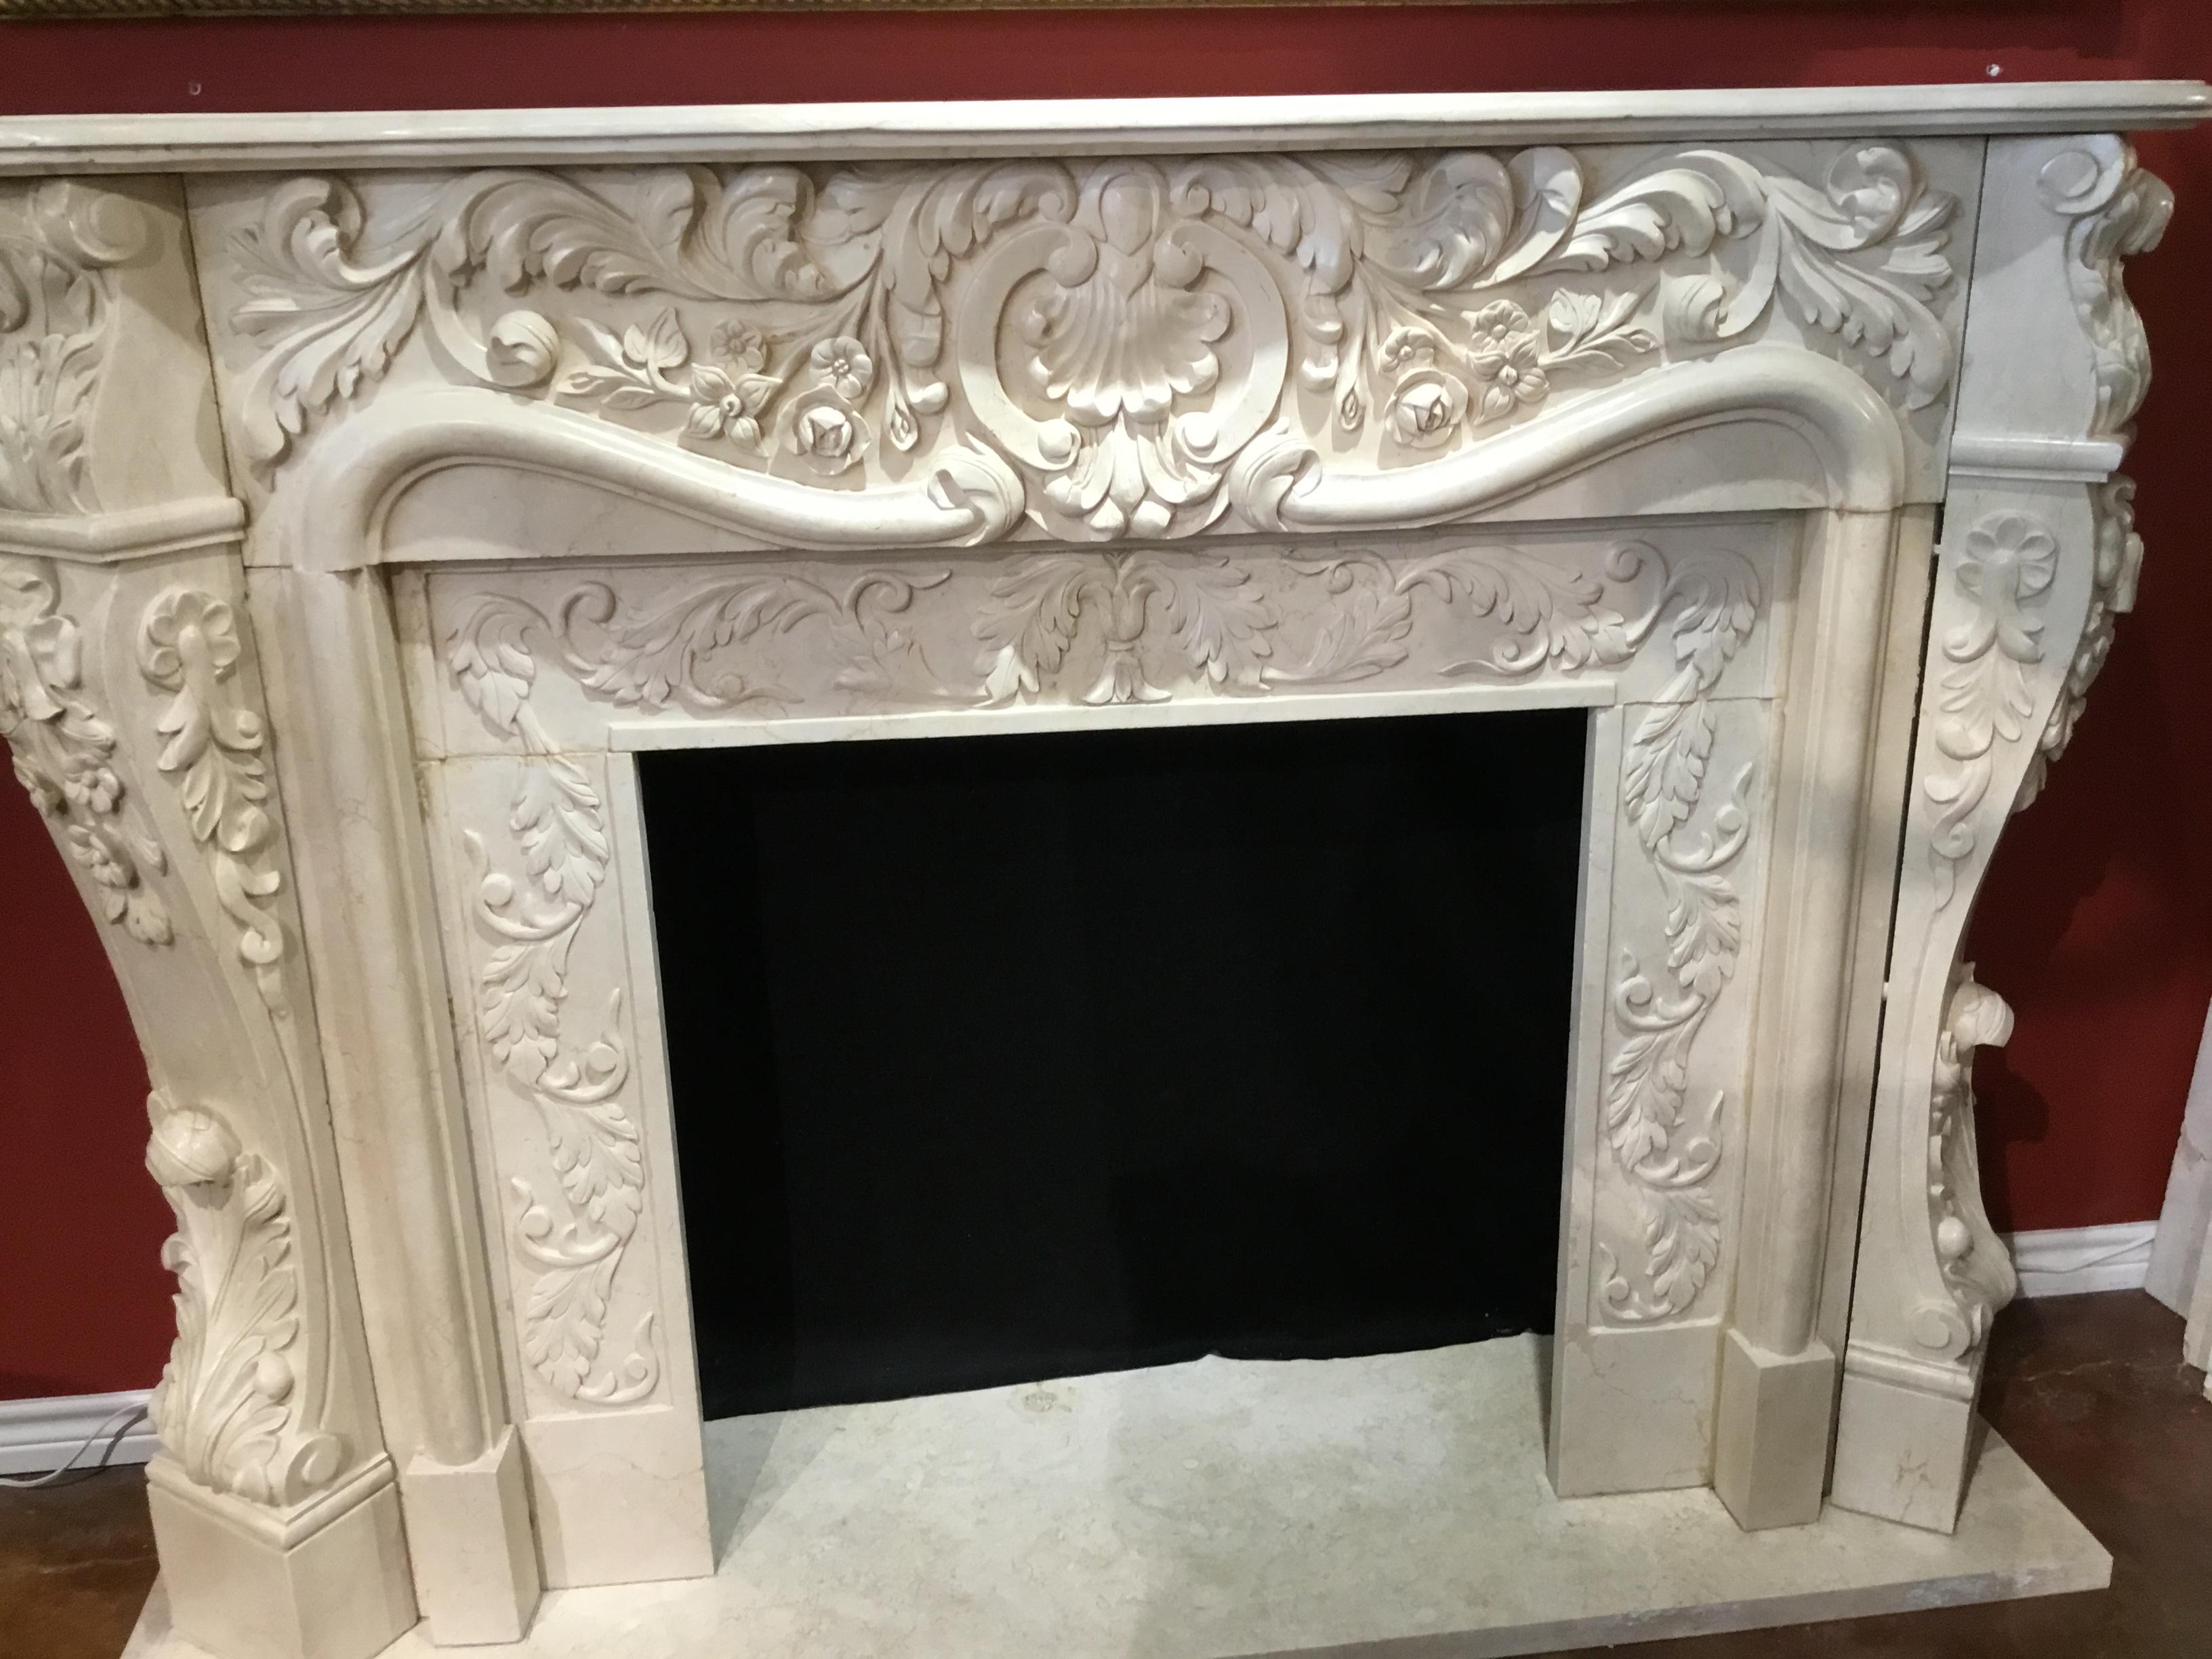 Cream marble hand carved in intricate designs featuring floral and foliate designs. 
Graceful curved legs at the front angle of this piece makes a desirable presentation 
From both the front and sides. A central shell is carved at the front center